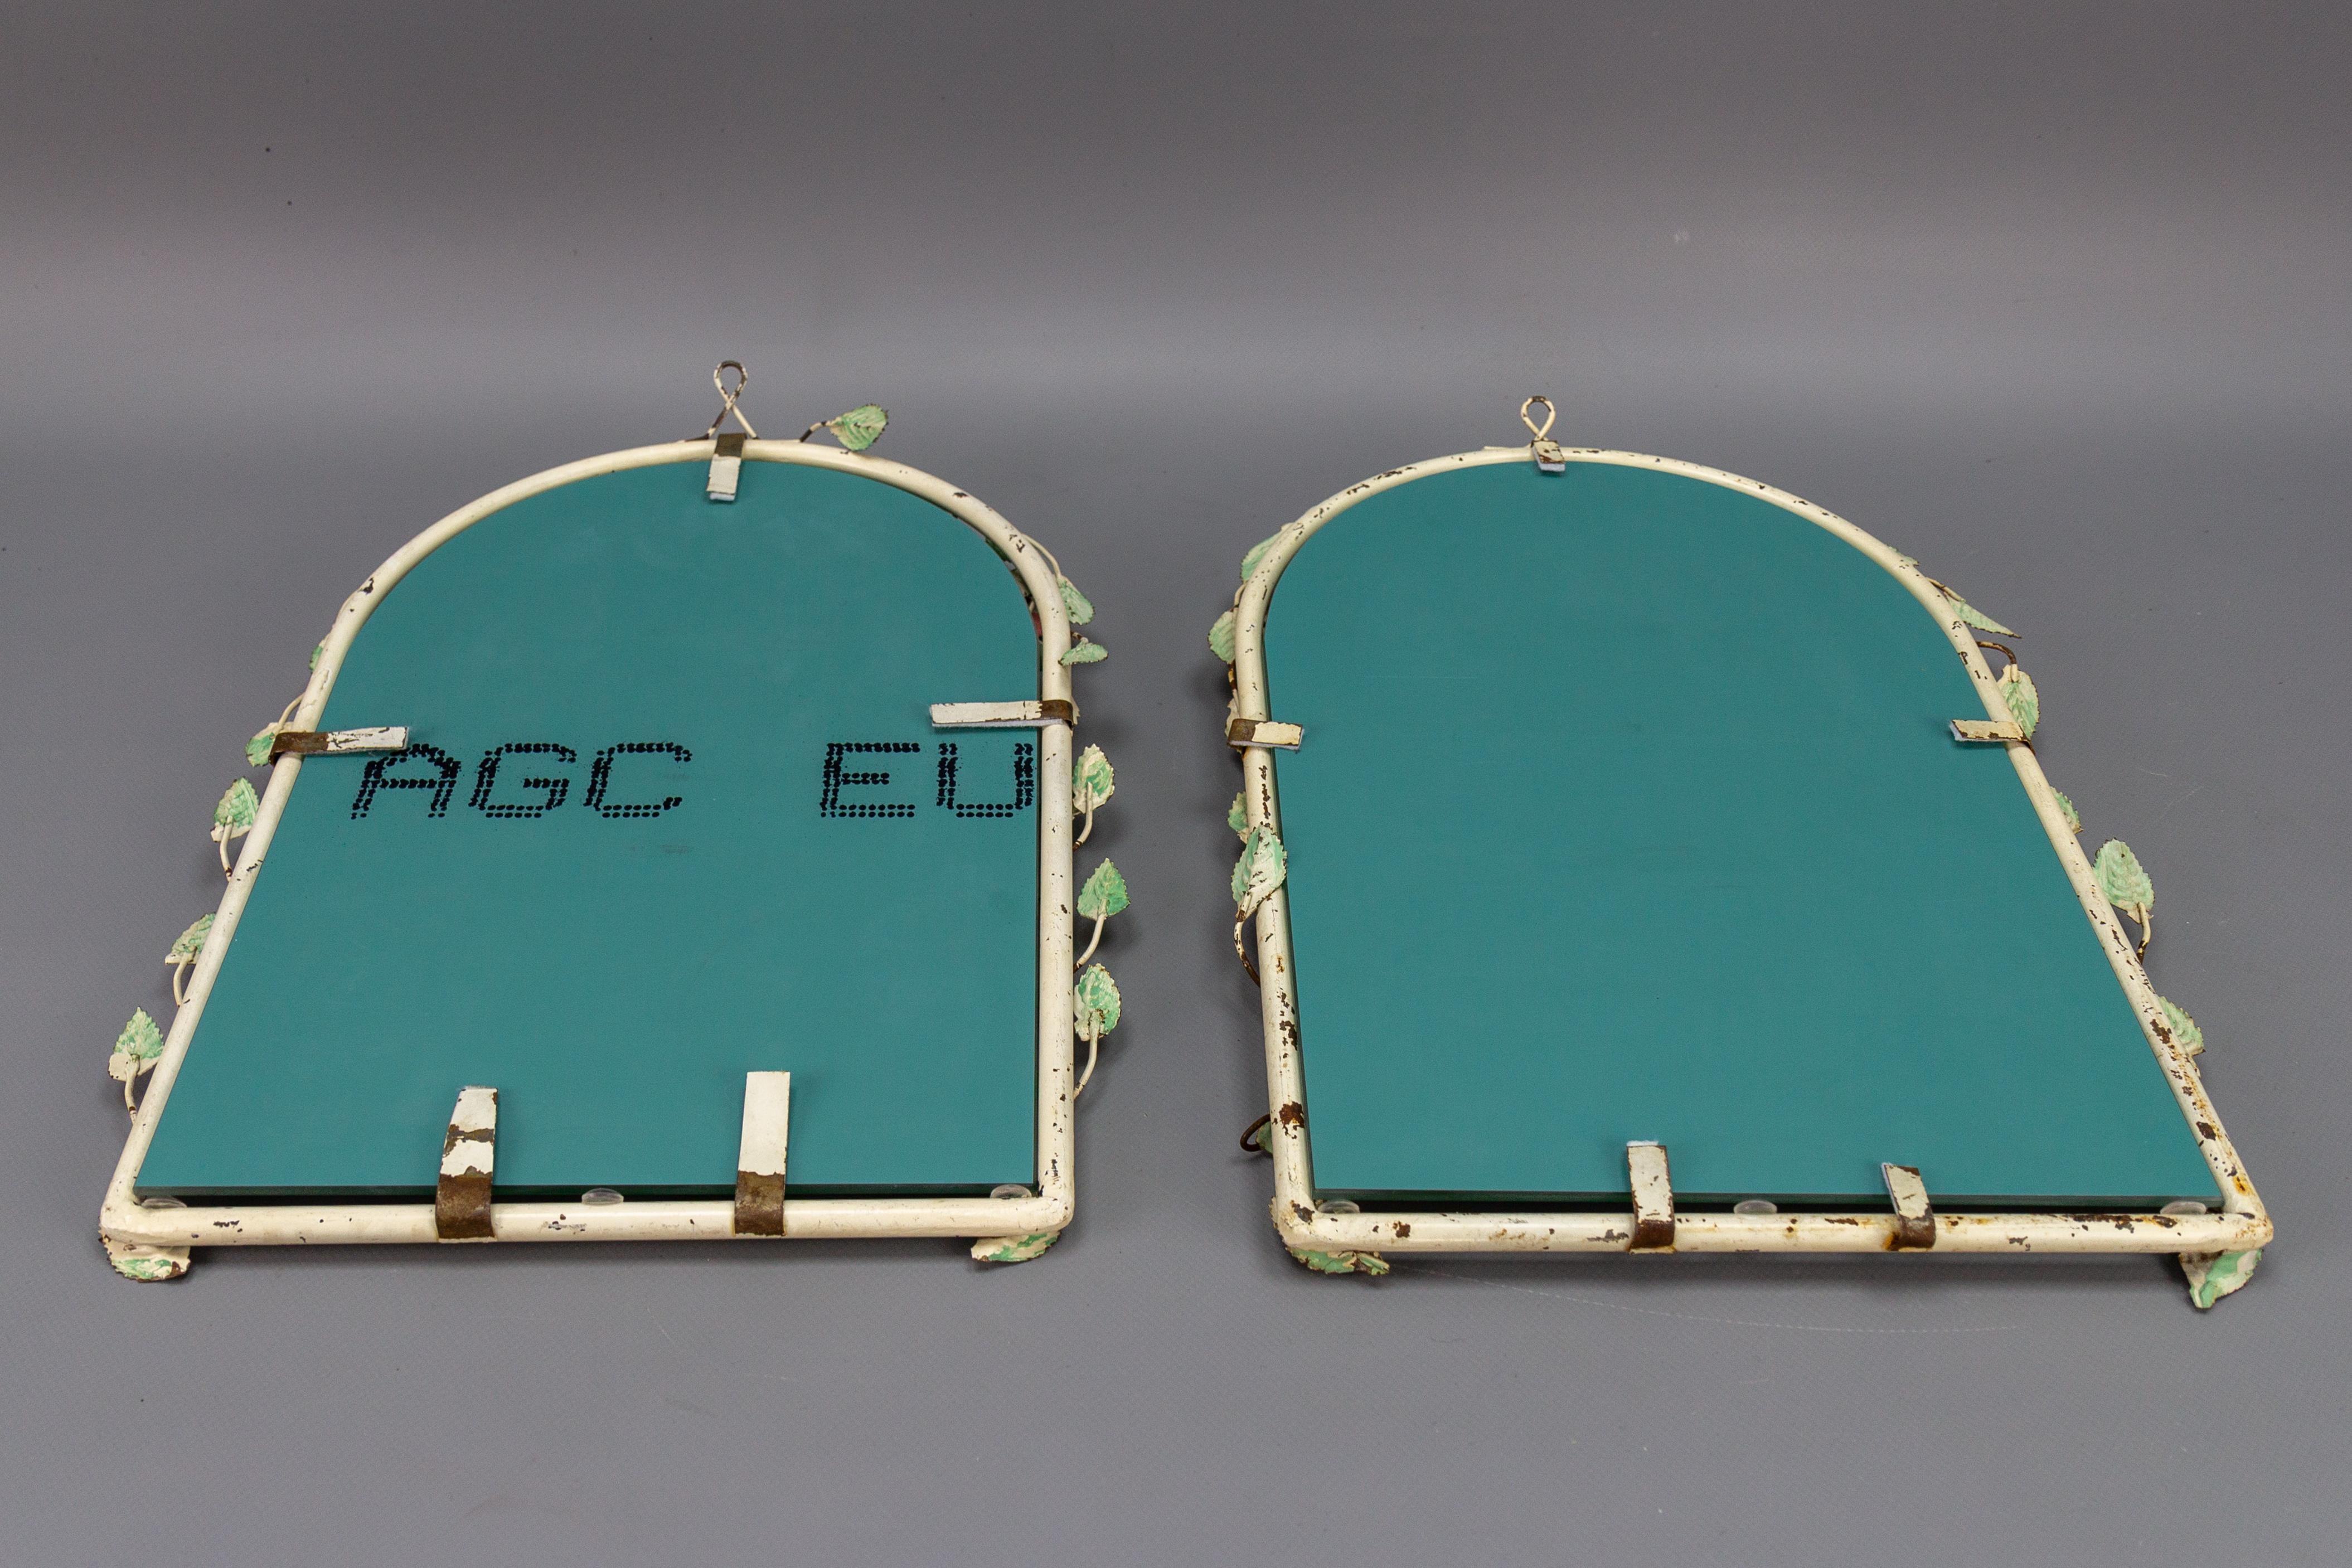 Pair of Italian Painted Tole Flower Wall Mirrors, 1950s For Sale 12